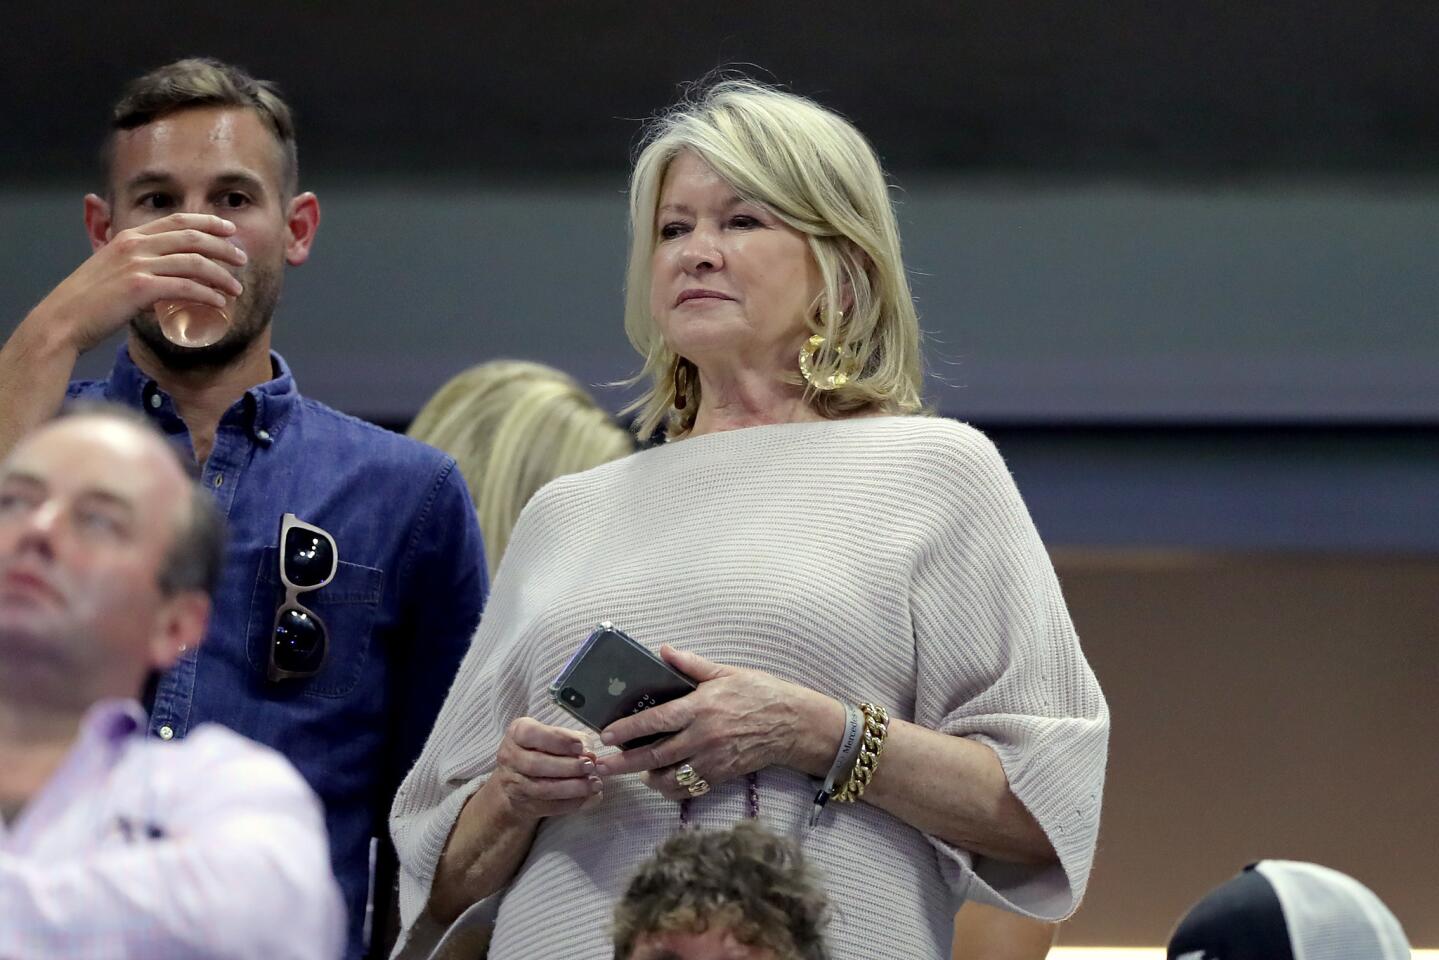 Martha Stewart attends the Women's Singles quarterfinal match between Serena Williams of the United States and Qiang Wang of China on day nine of the 2019 U.S. Open at the USTA Billie Jean King National Tennis Center on Sept. 3, 2019, in Queens.